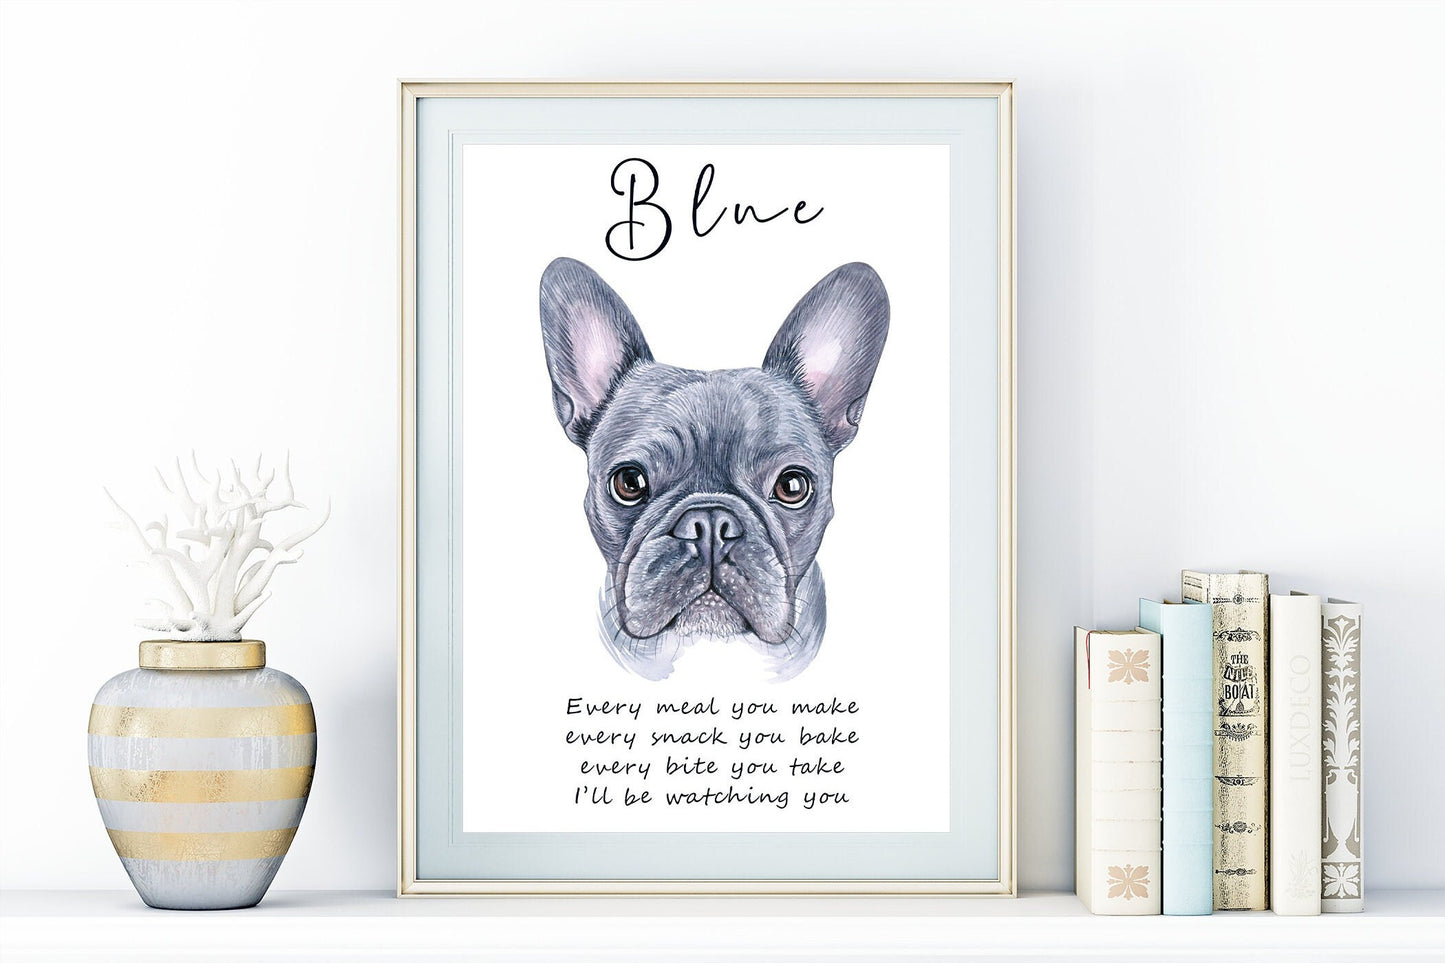 French bulldog and Boston terrier art - charming dog portrait with custom funny or heart warming message | A4 | A5 | Greeting card